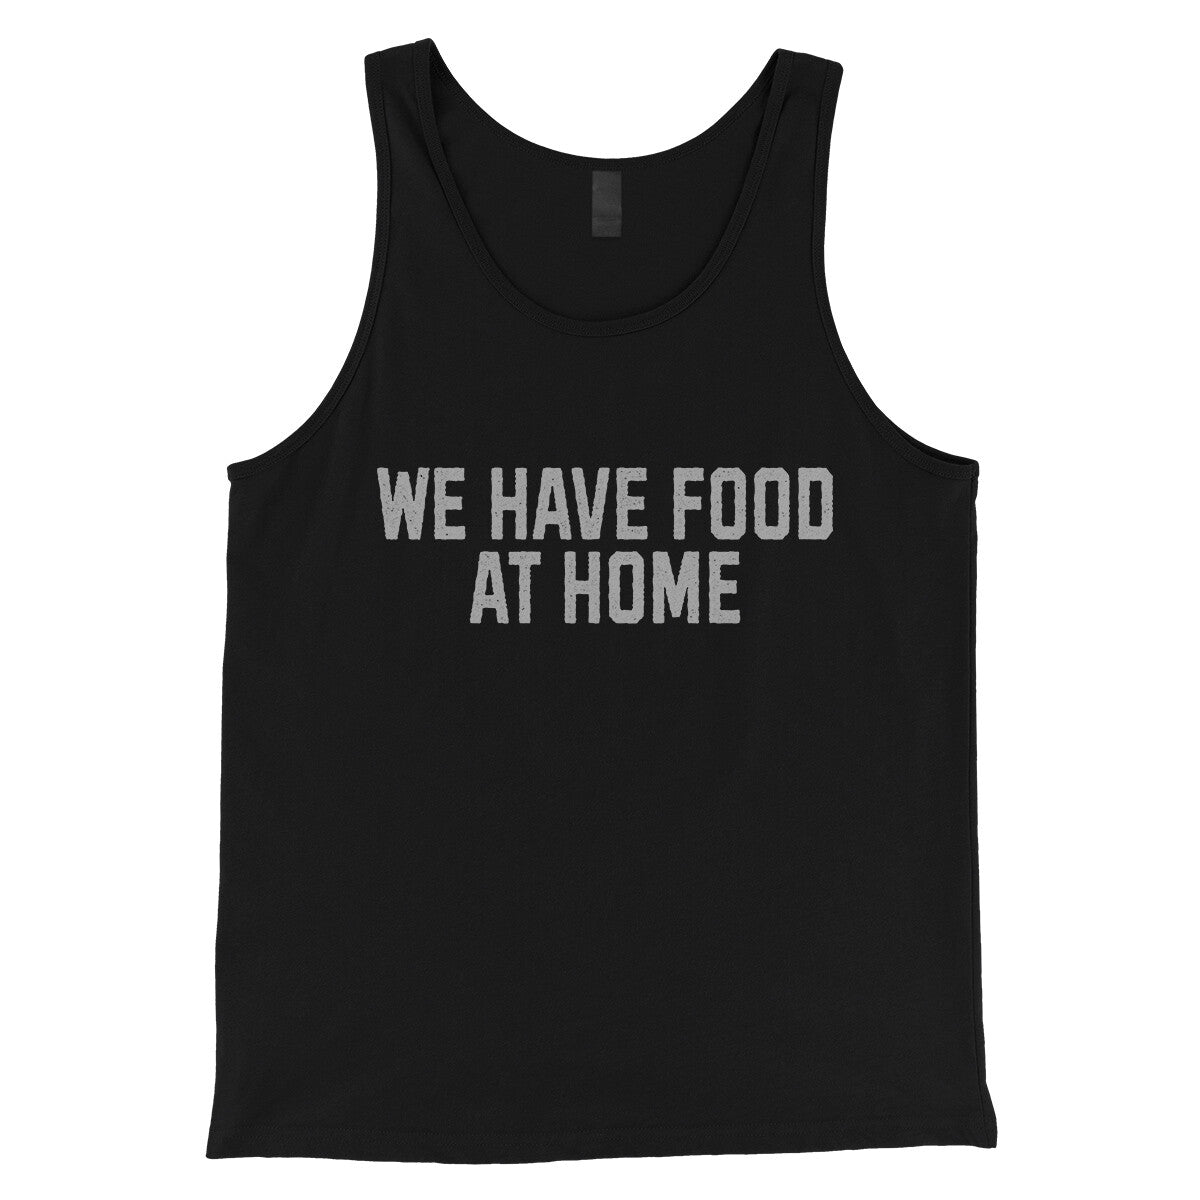 We Have Food at Home in Black Color